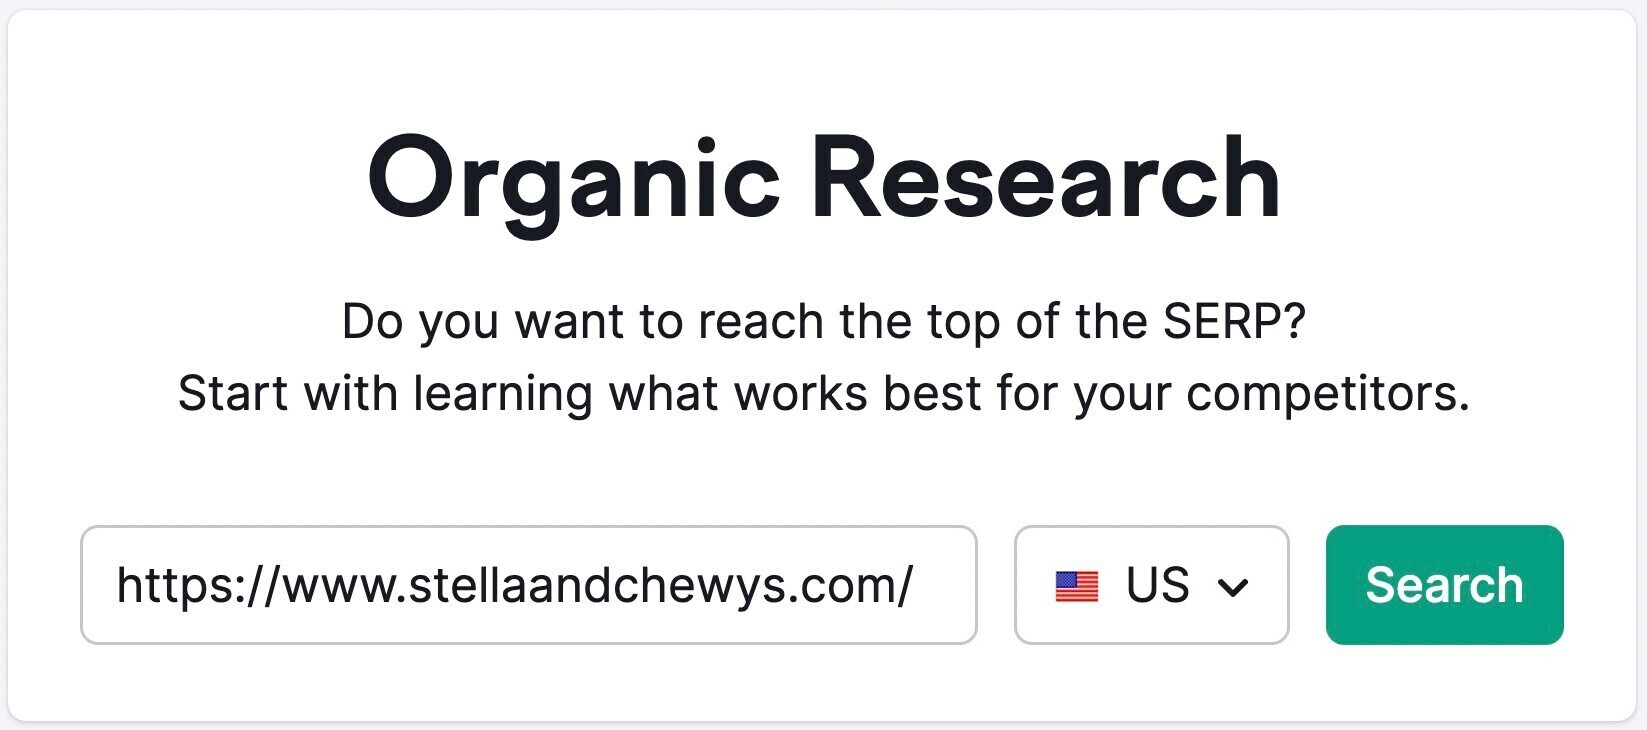 Organic Research tool with "https://www.stellaandchewys.com/" in the search bar